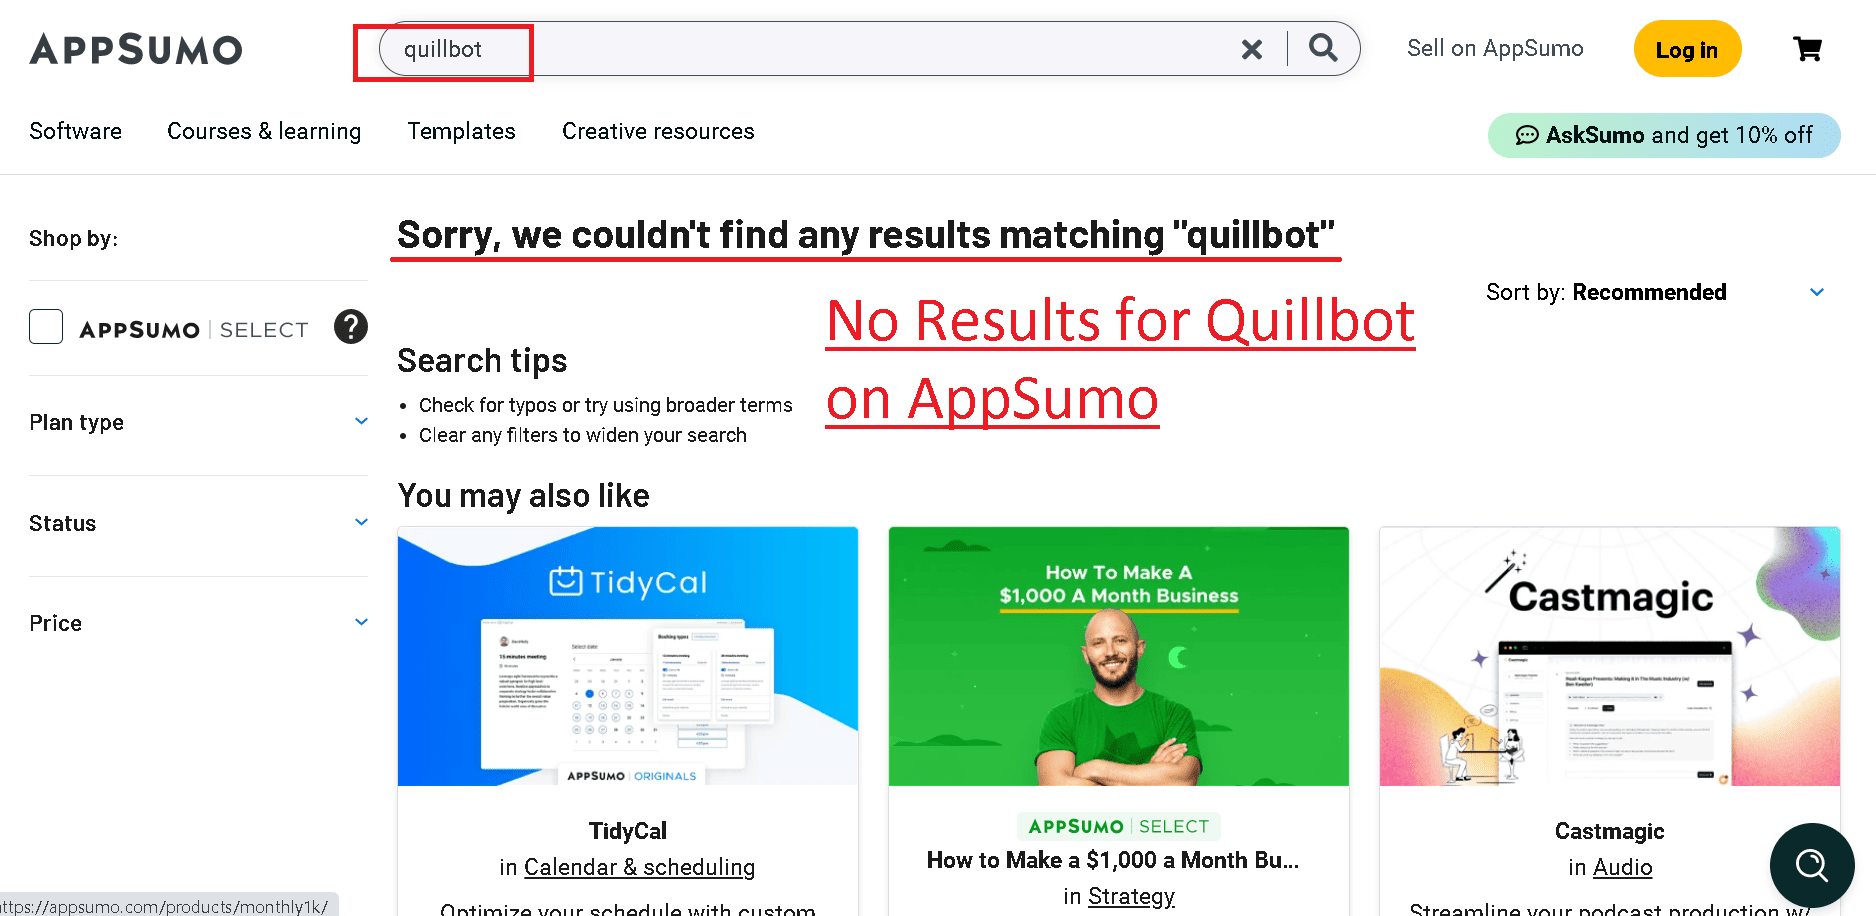 Quillbot AppSumo deal doesn't exist